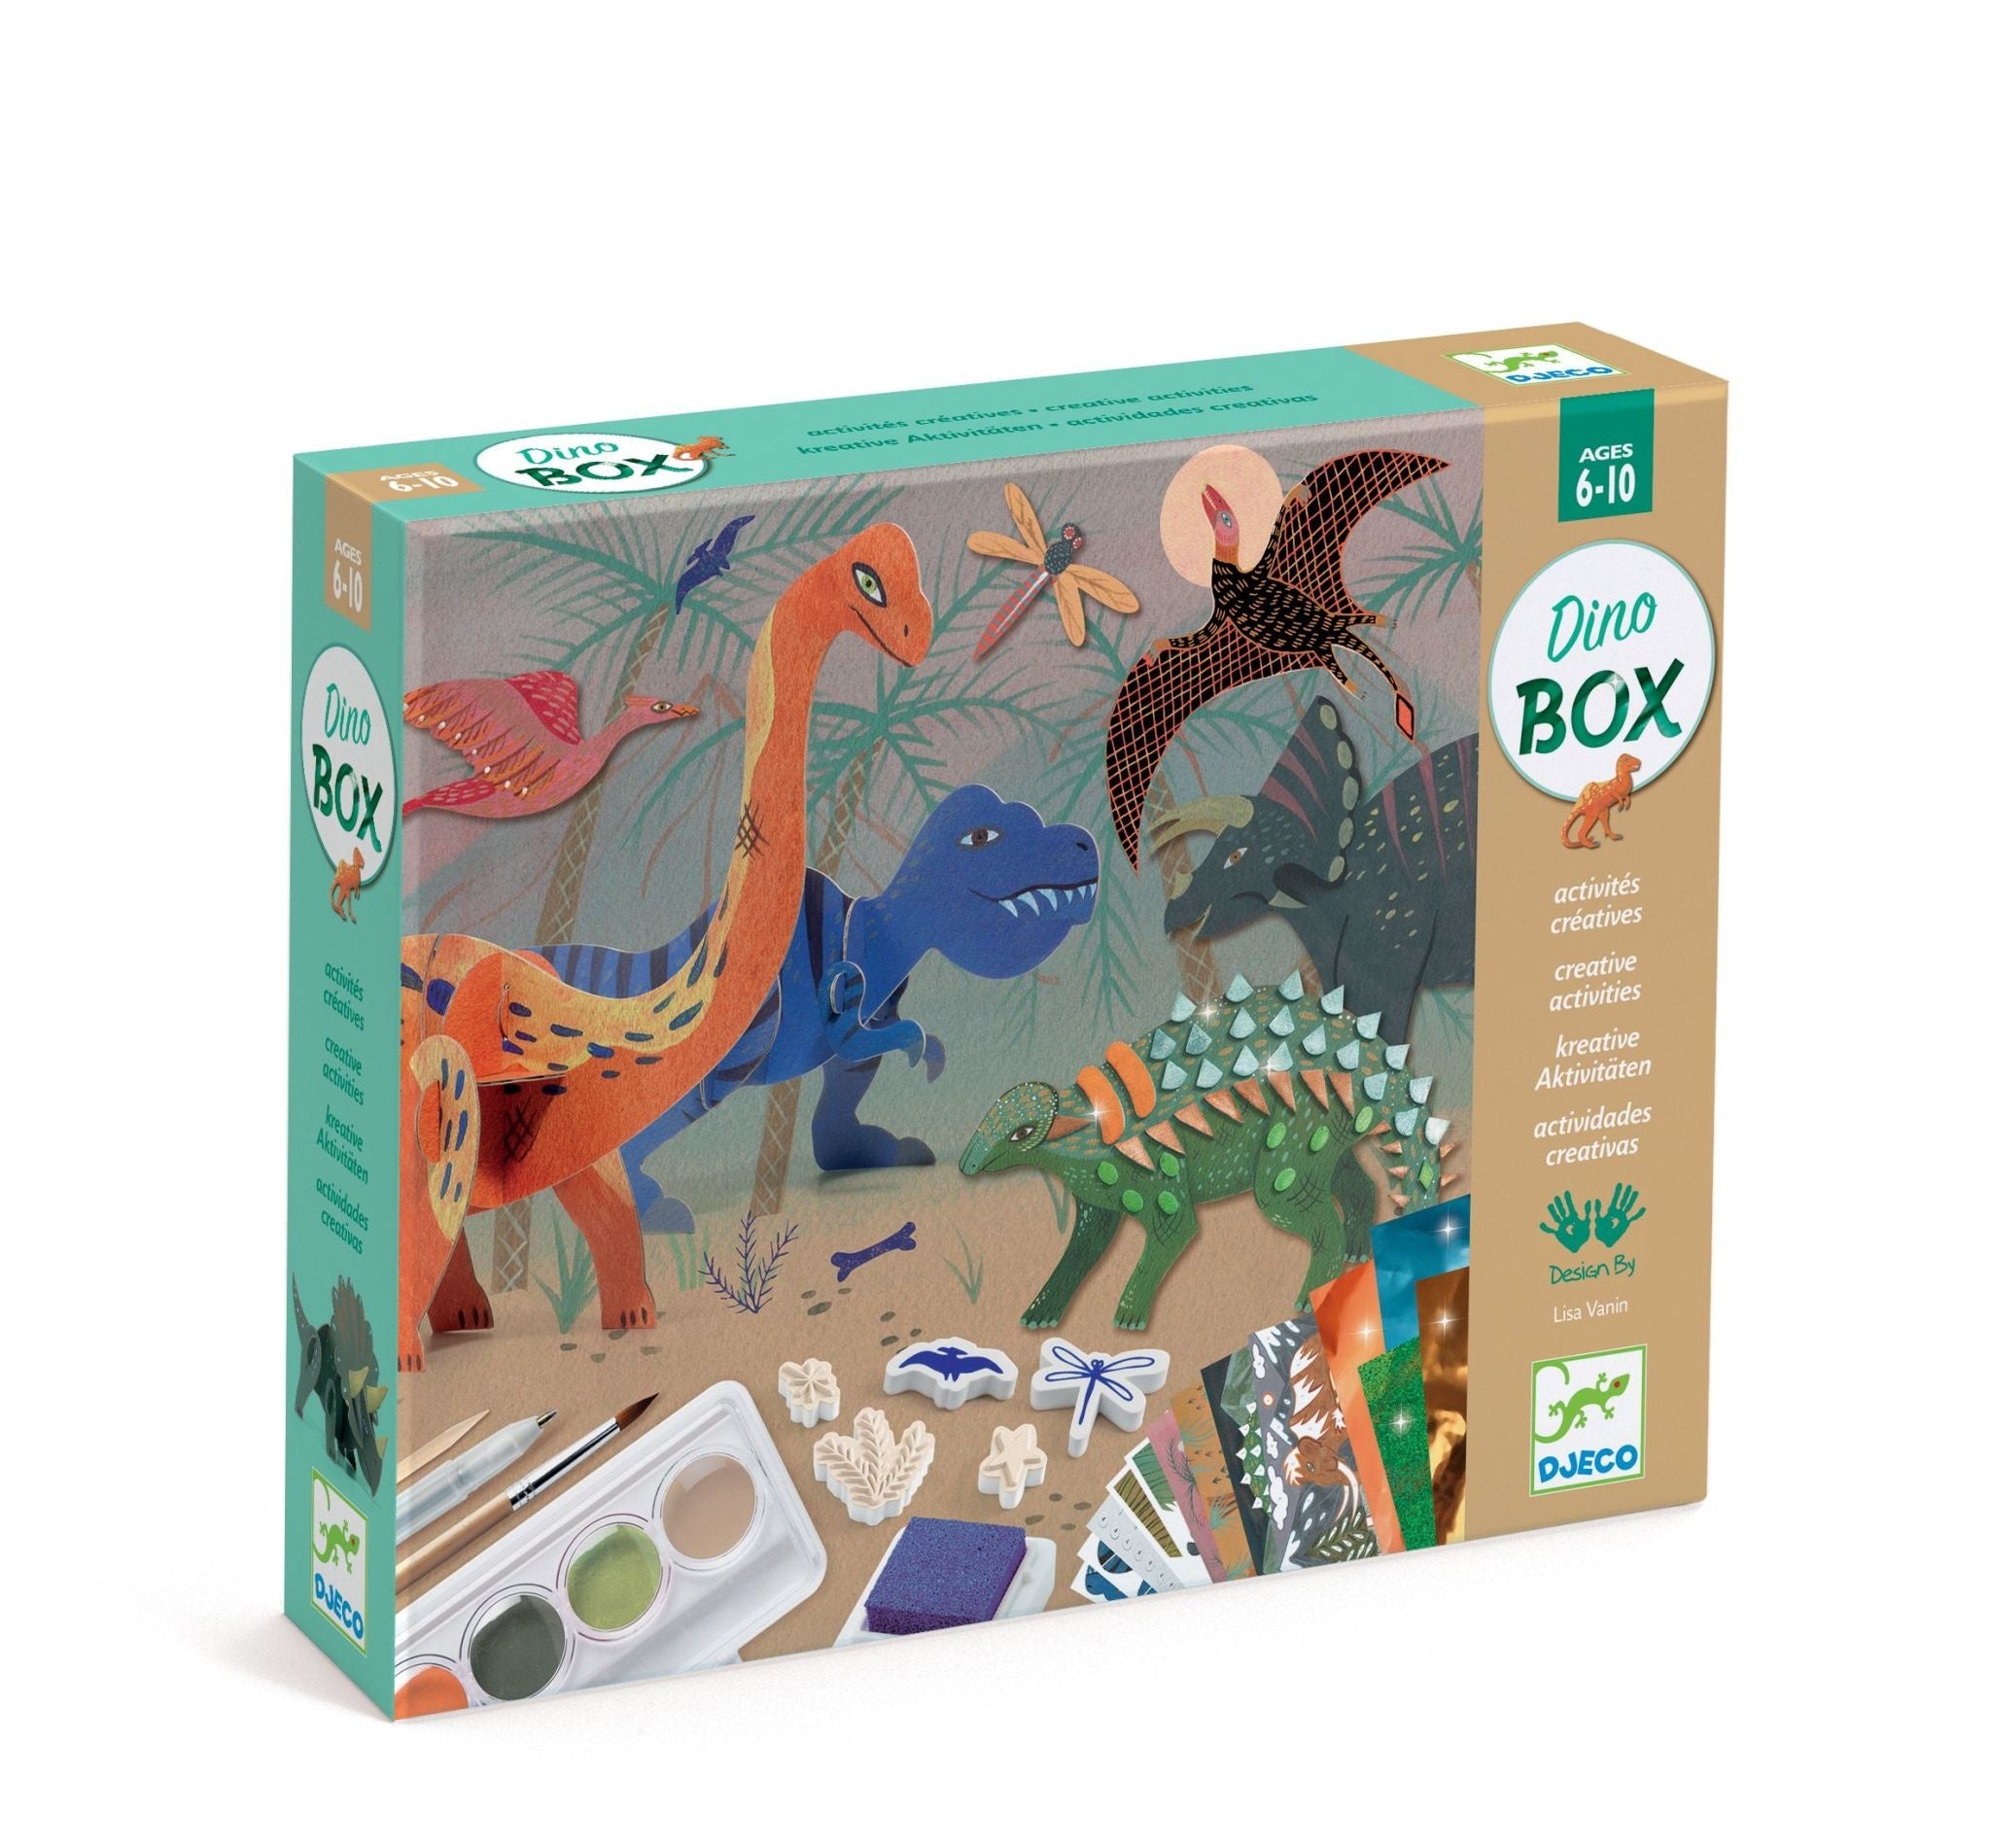 Metal Earth Dinosaur 3D Construction Kit - 24h delivery